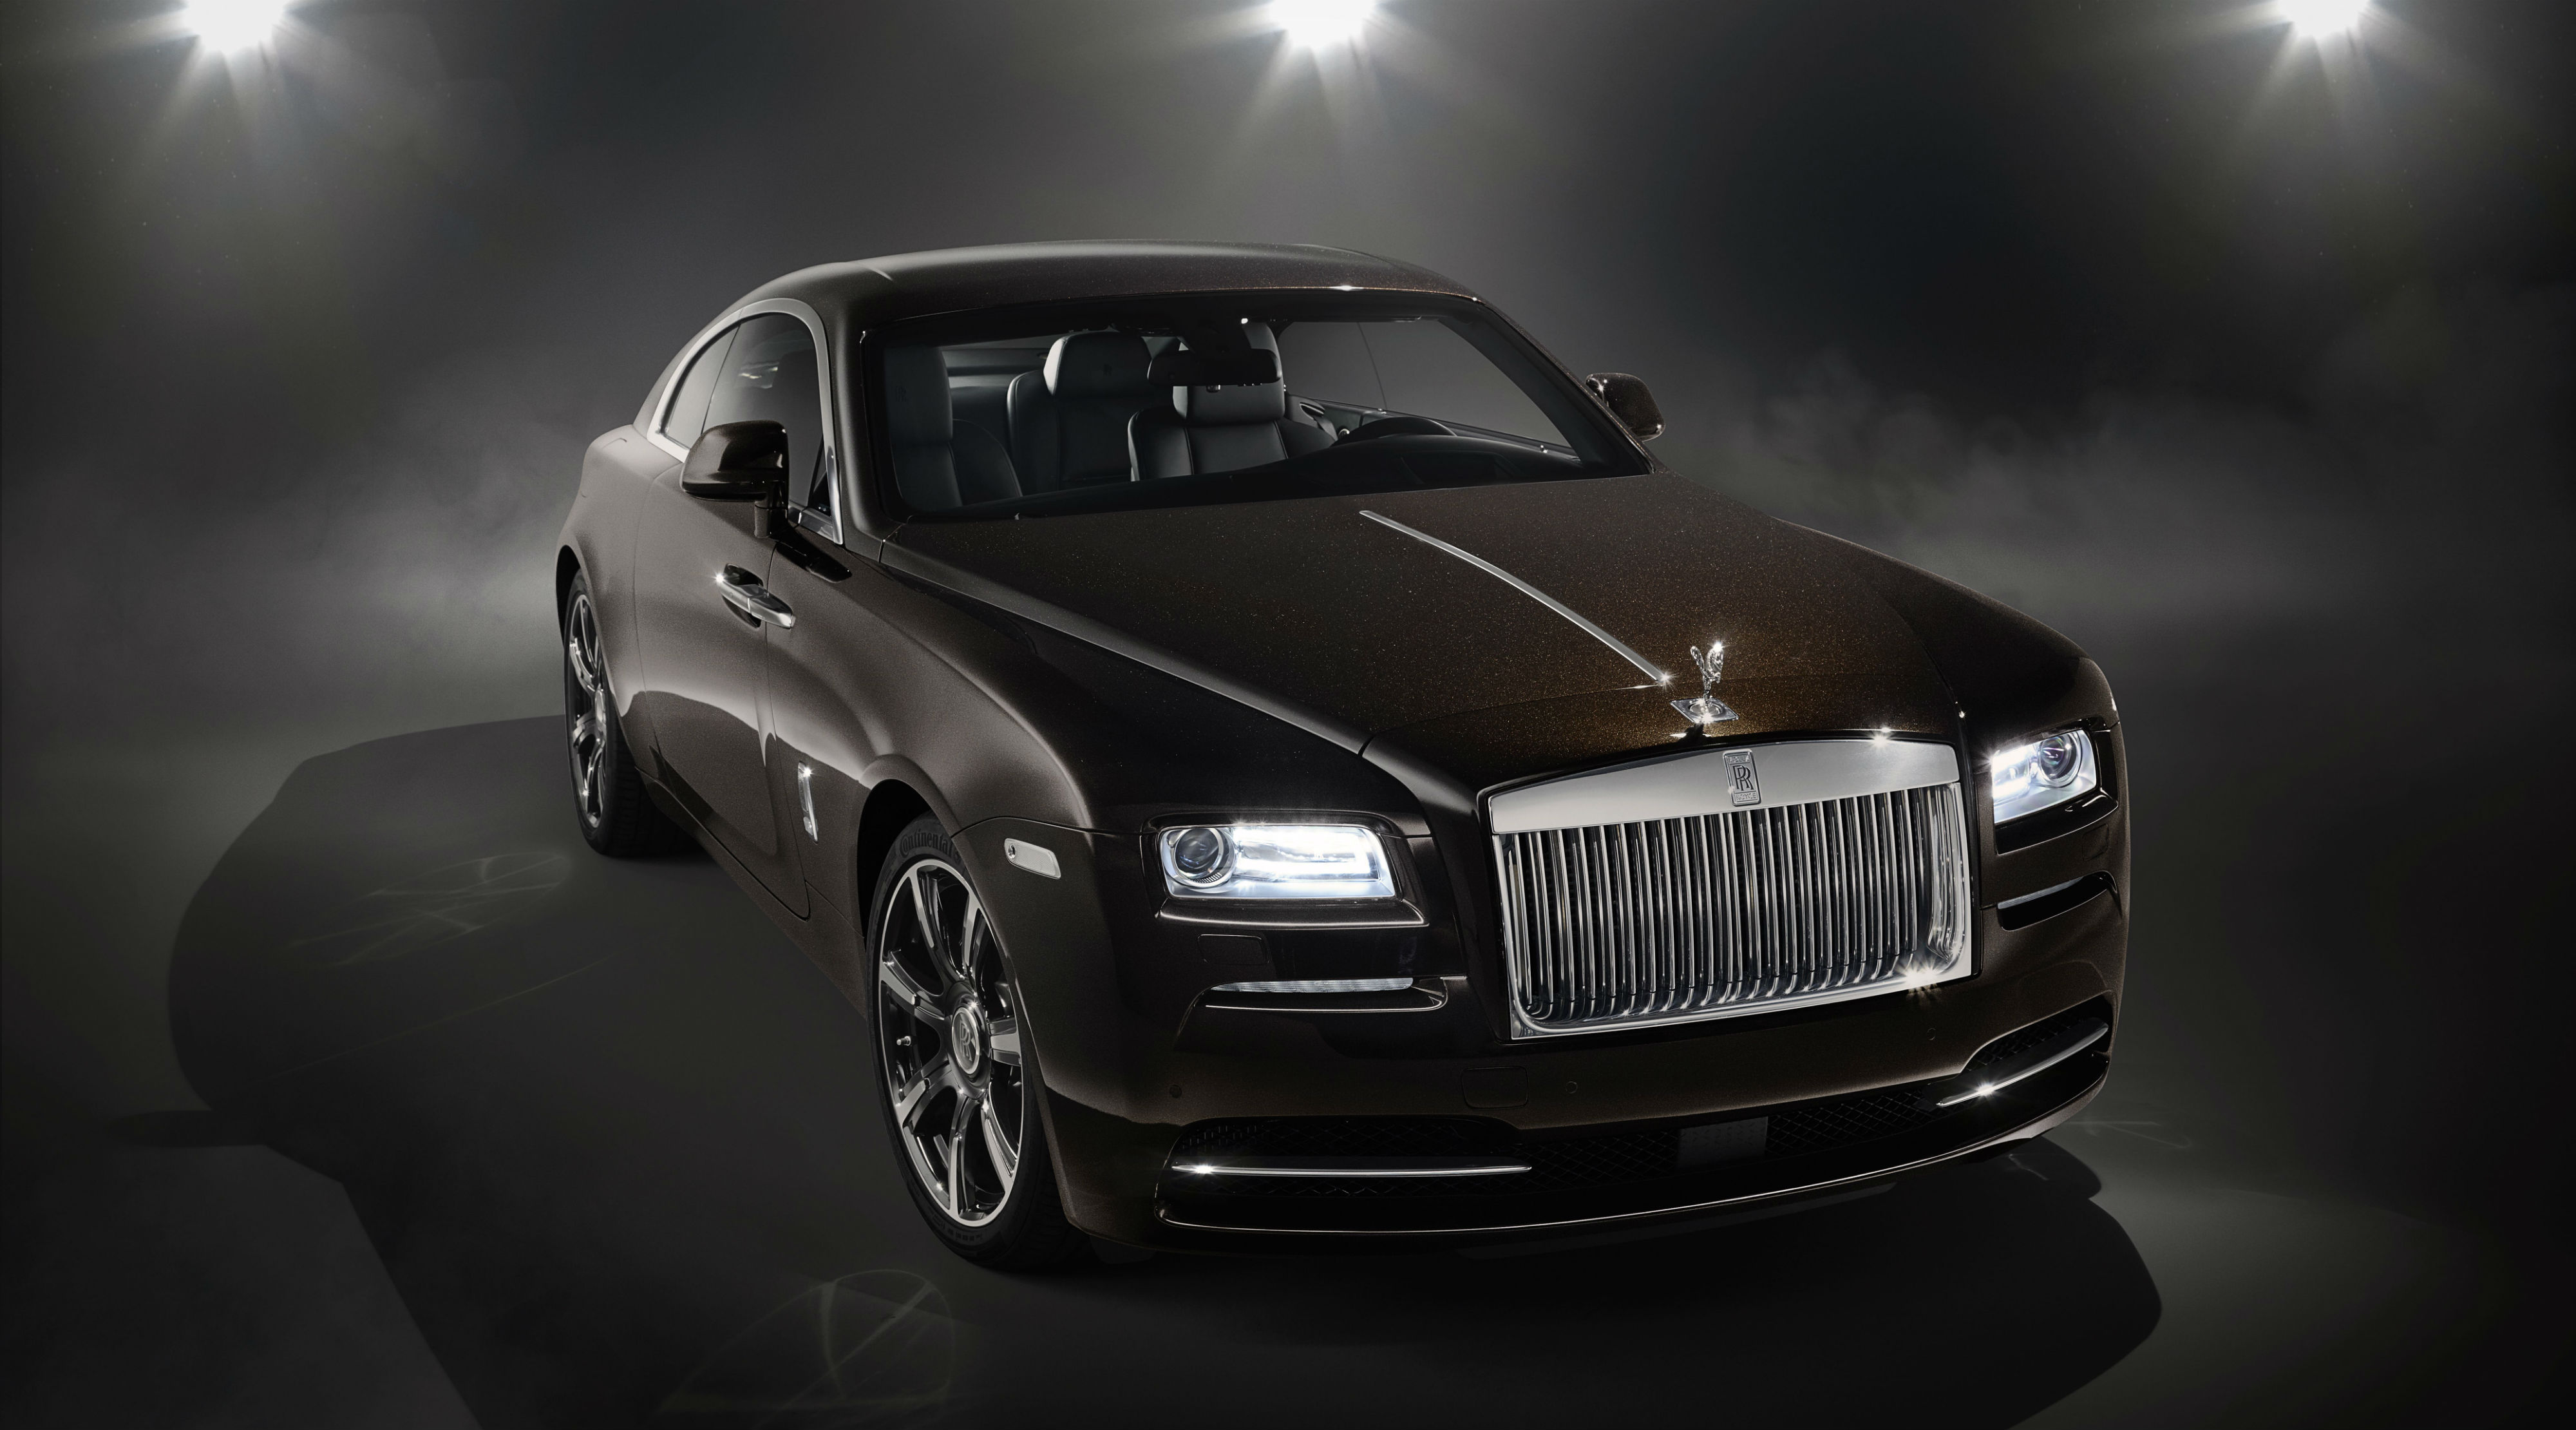 Five of the most expensive car options that are no April Fools joke, including the Rolls-Royce Wraith